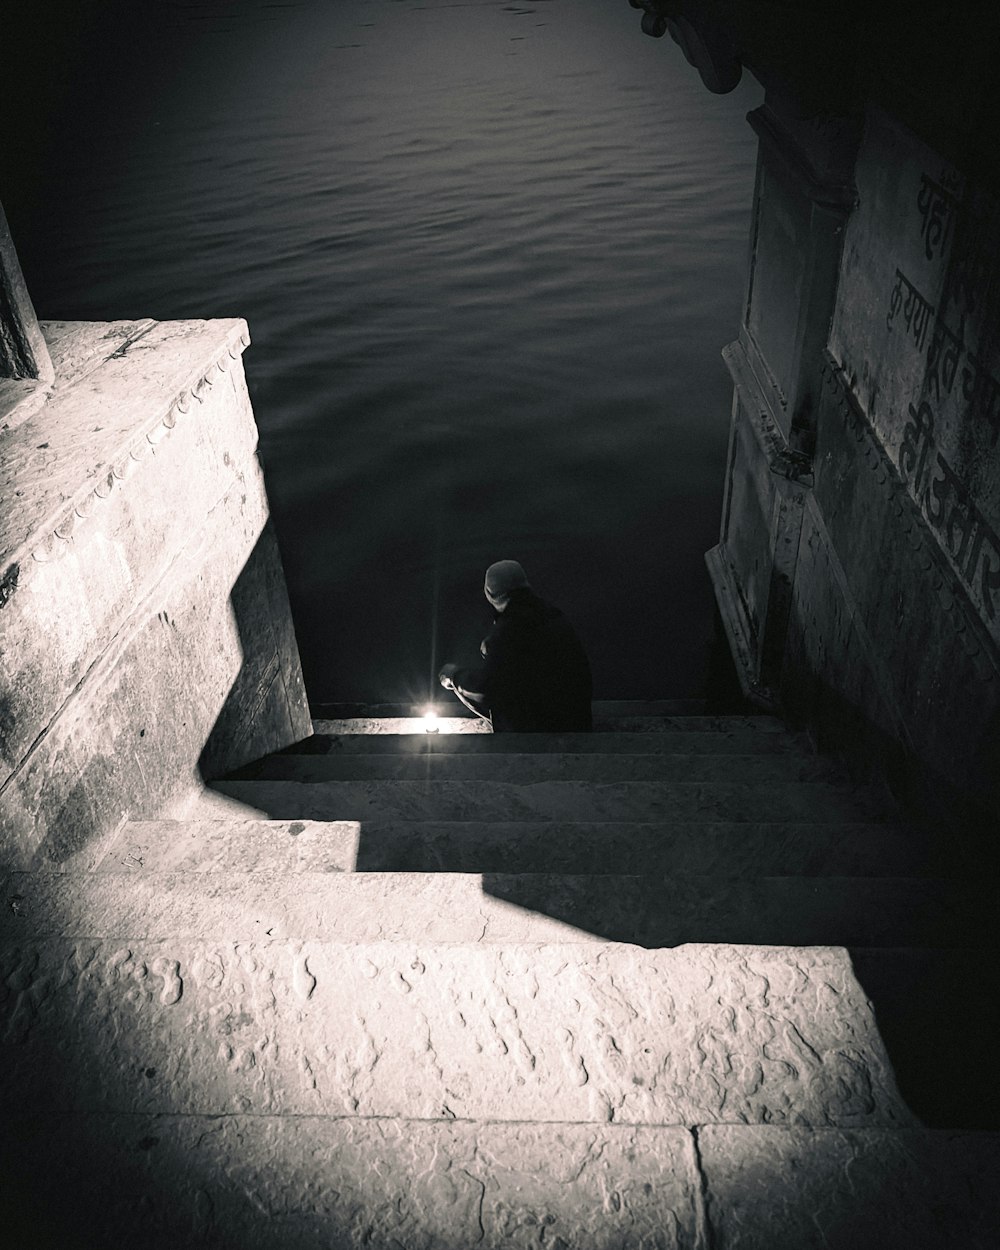 a person sitting on a set of stairs next to a body of water